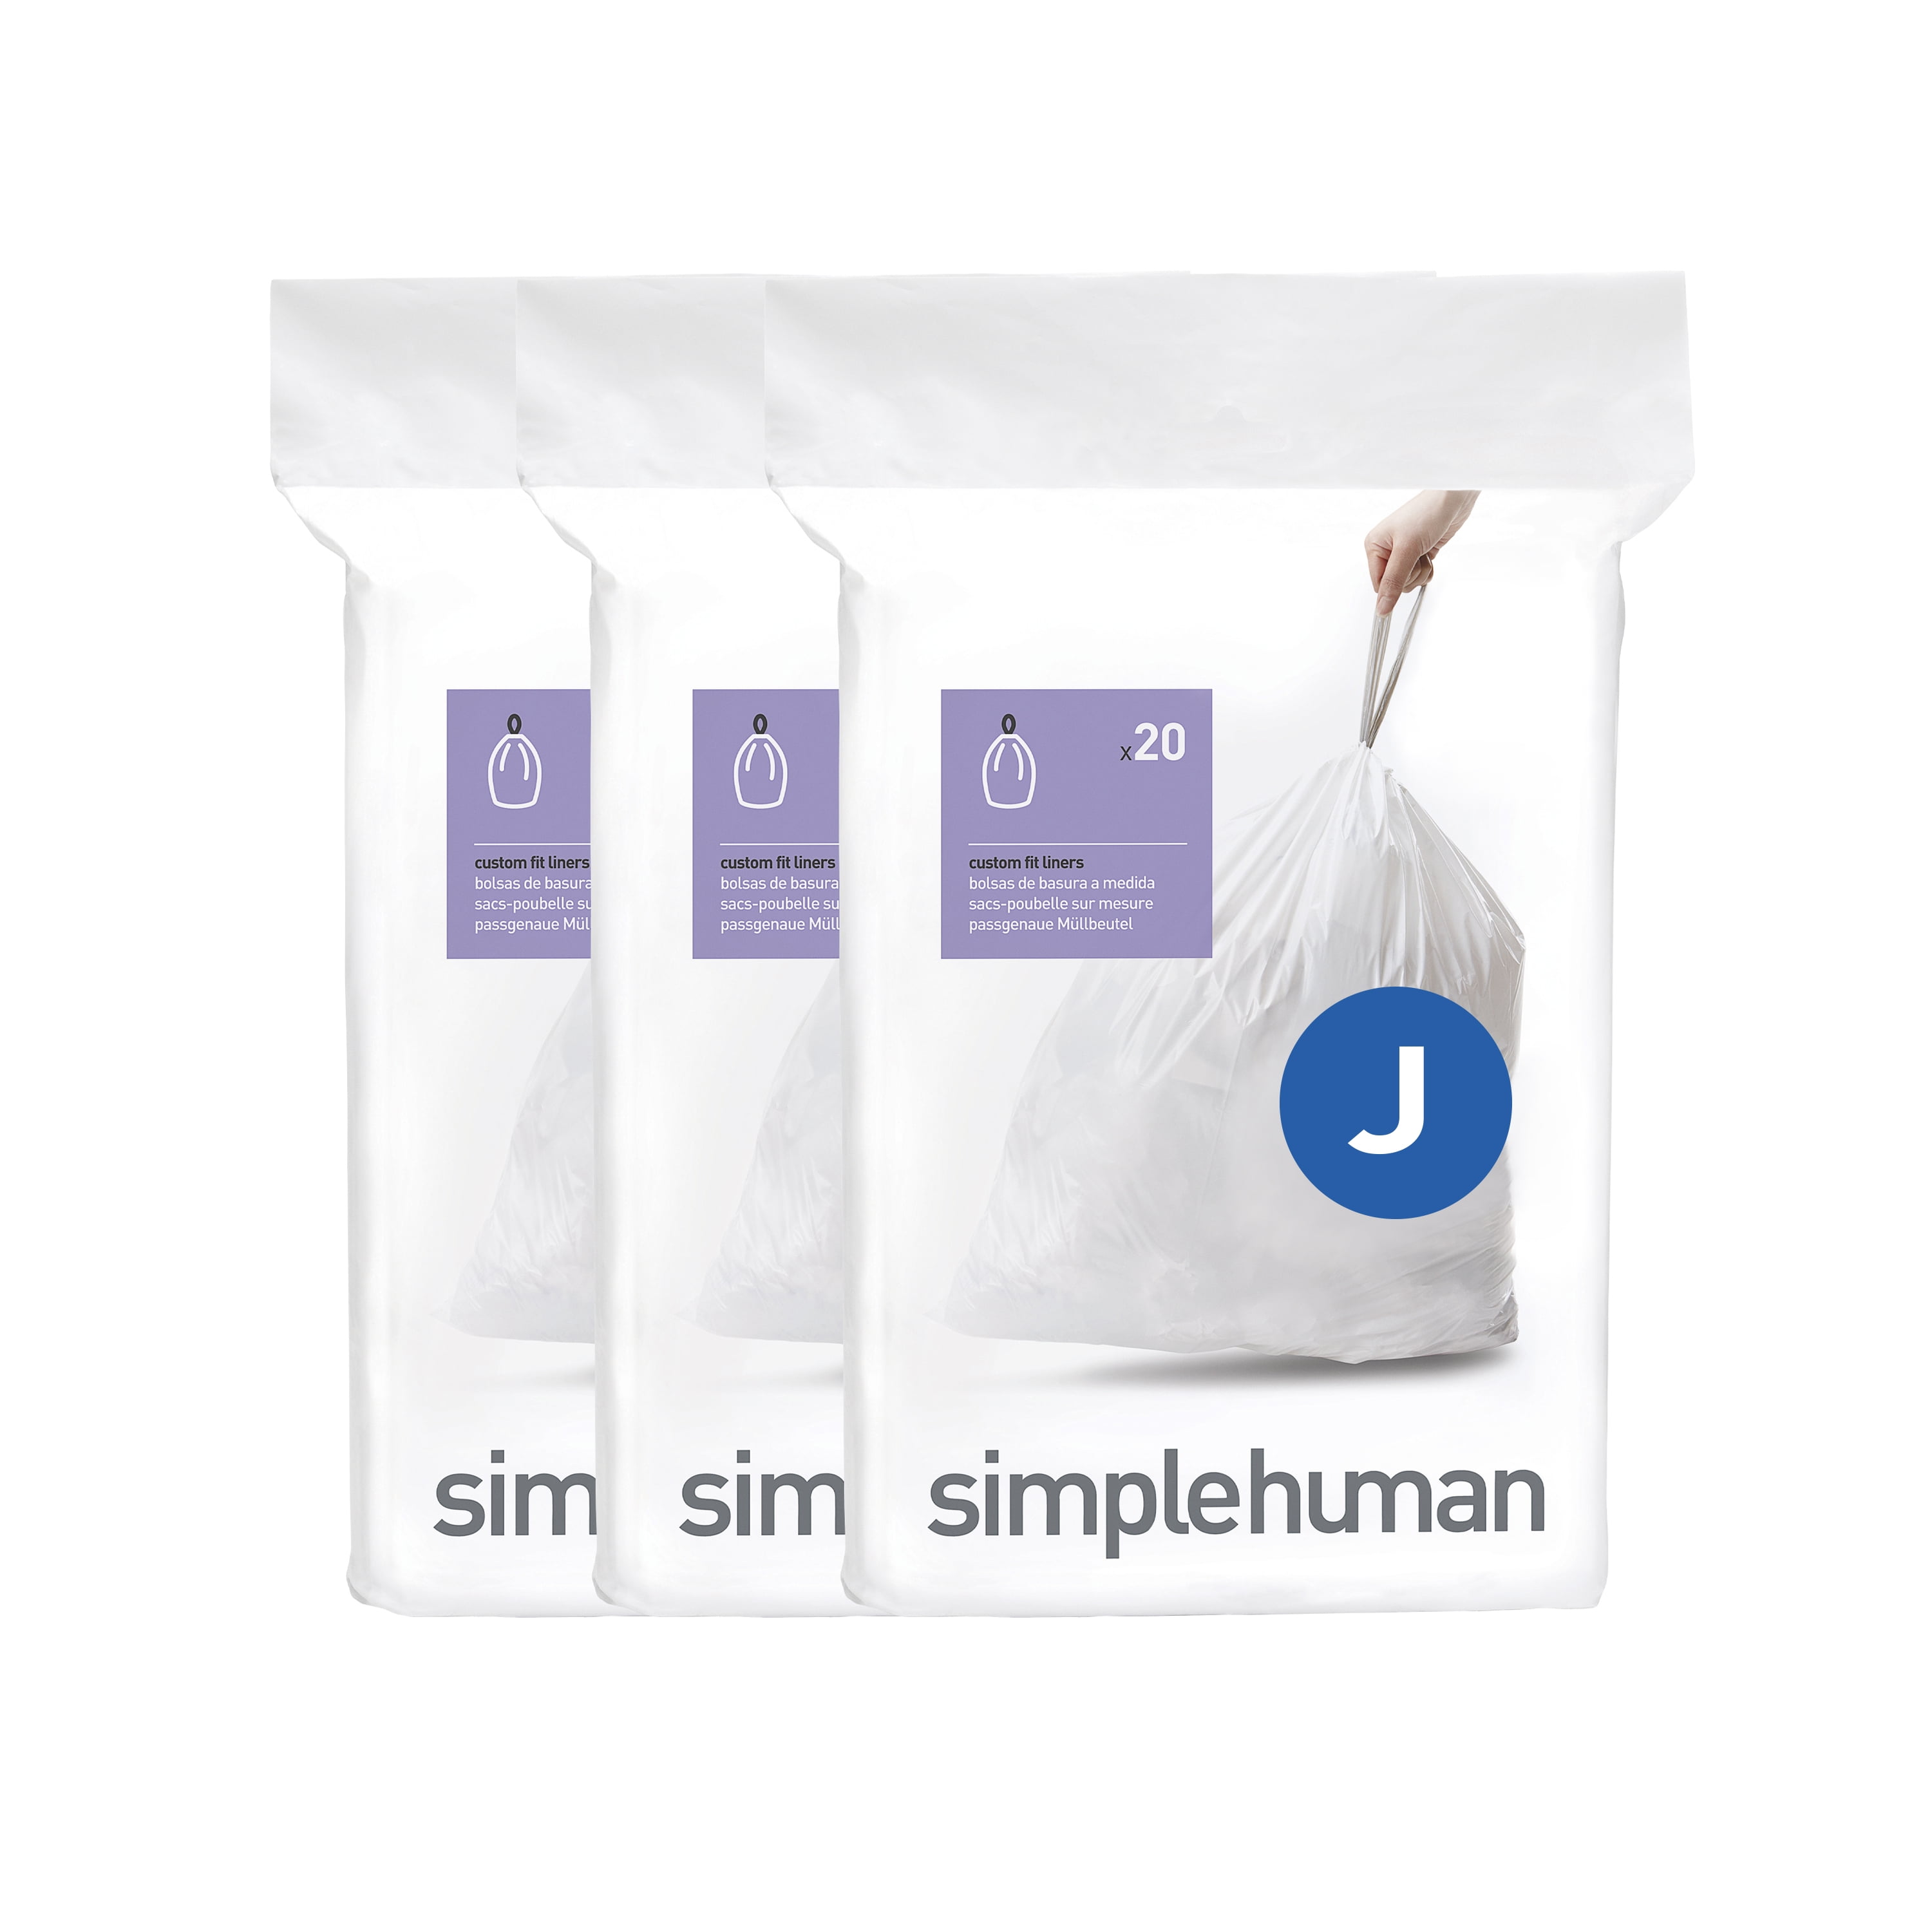 Plasticplace simplehuman Code M Compatible Trash Bags, 12 Gallon / 45 Liter White Drawstring Garbage Liners 21.5 x 30.75 (50 Count)